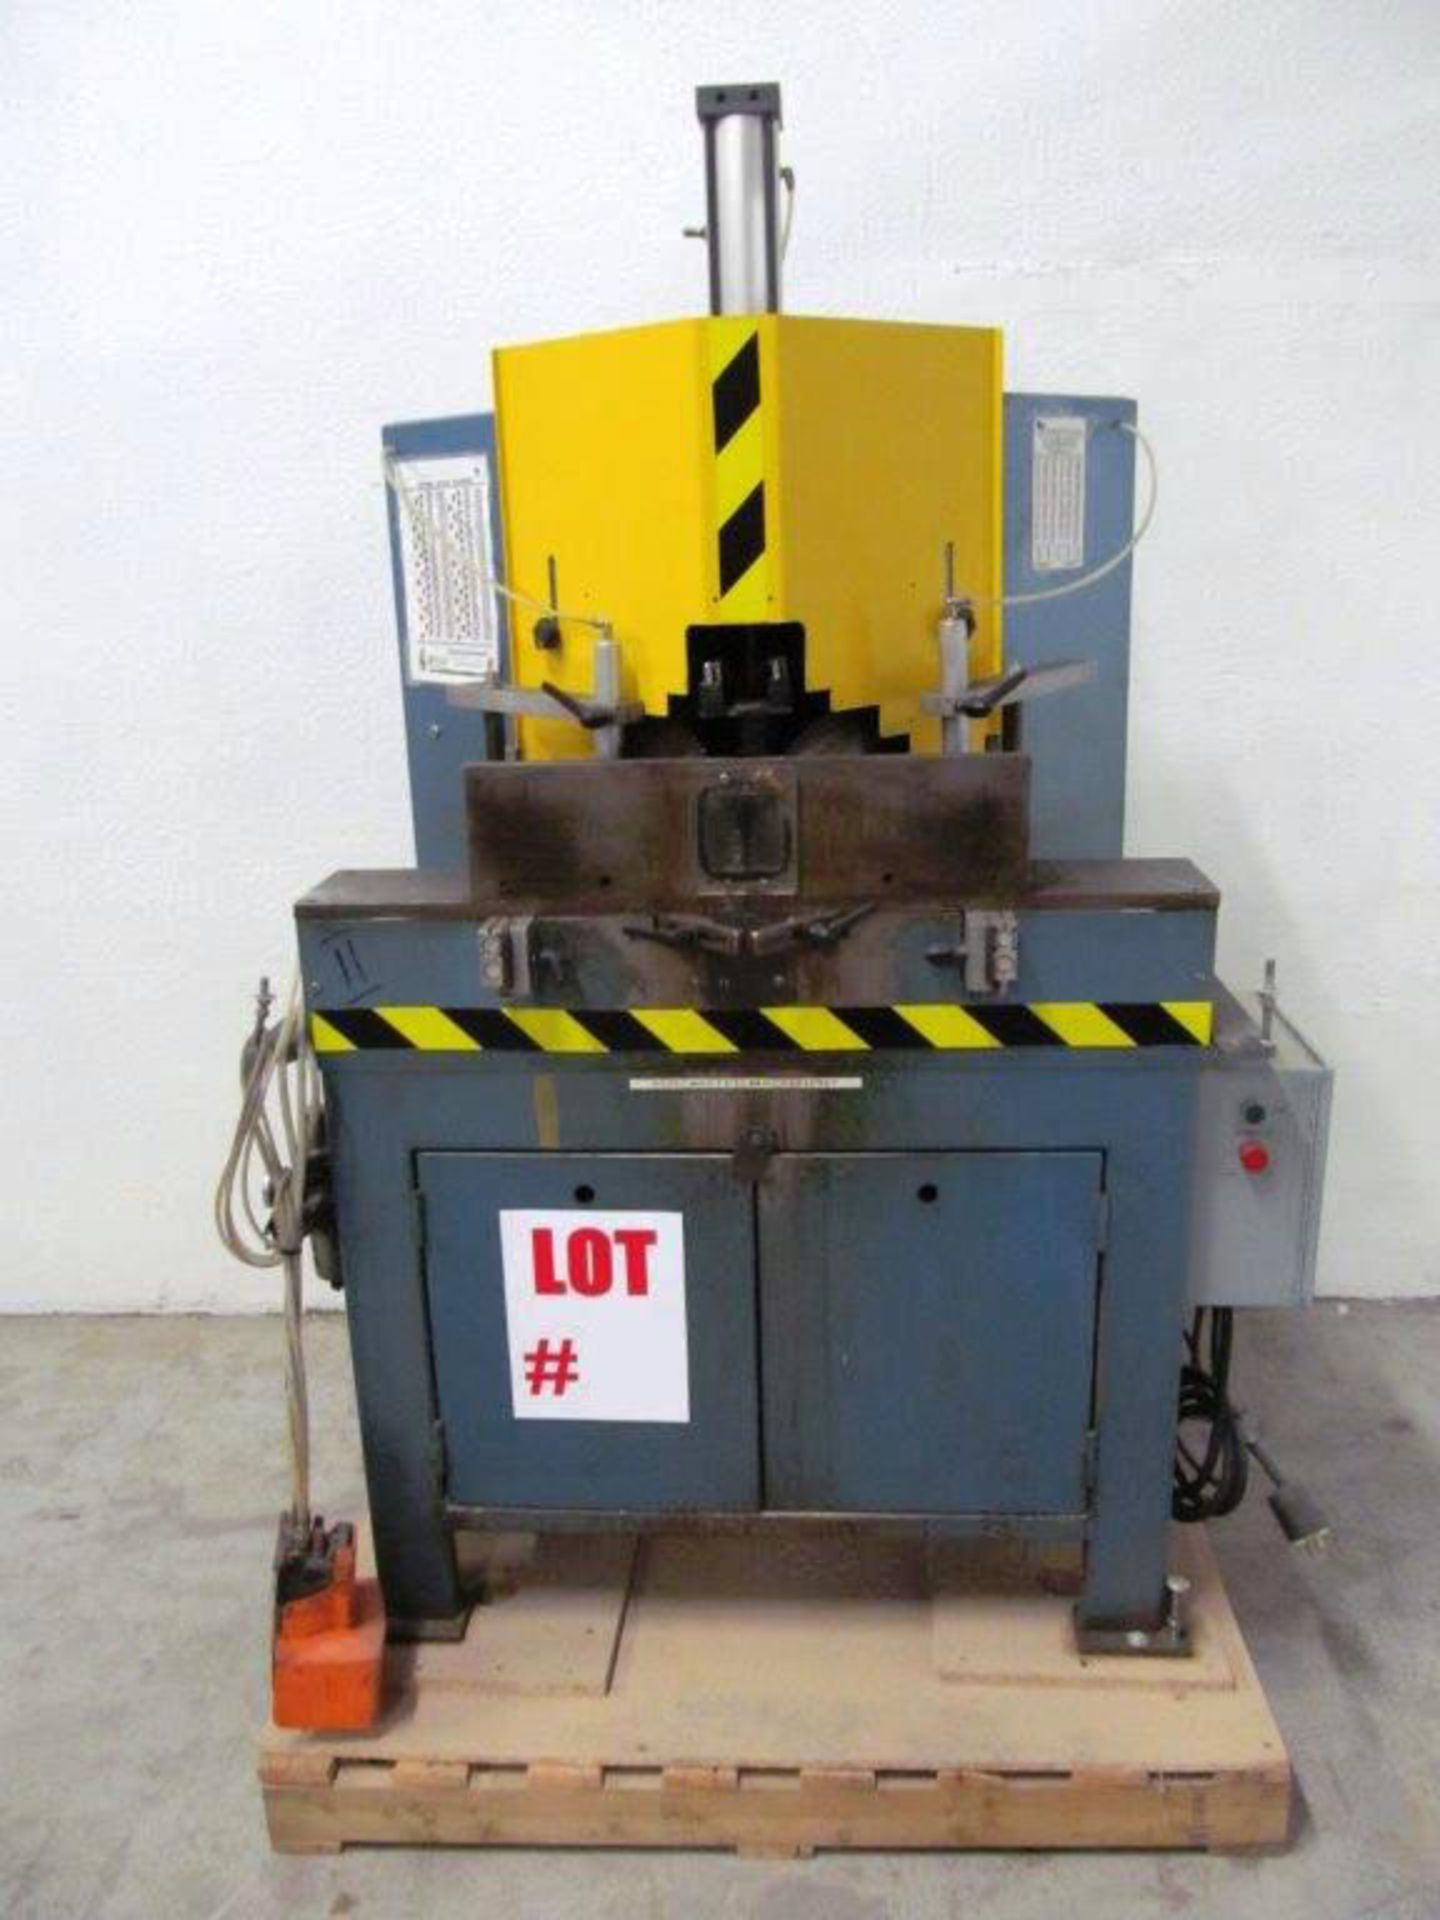 AUTOMATED MACHINERY DOUBLE MITRE SAW @ 14'' DIAMETER BLADES, ELECTRICS: 220V/3PH/60C - Image 2 of 4